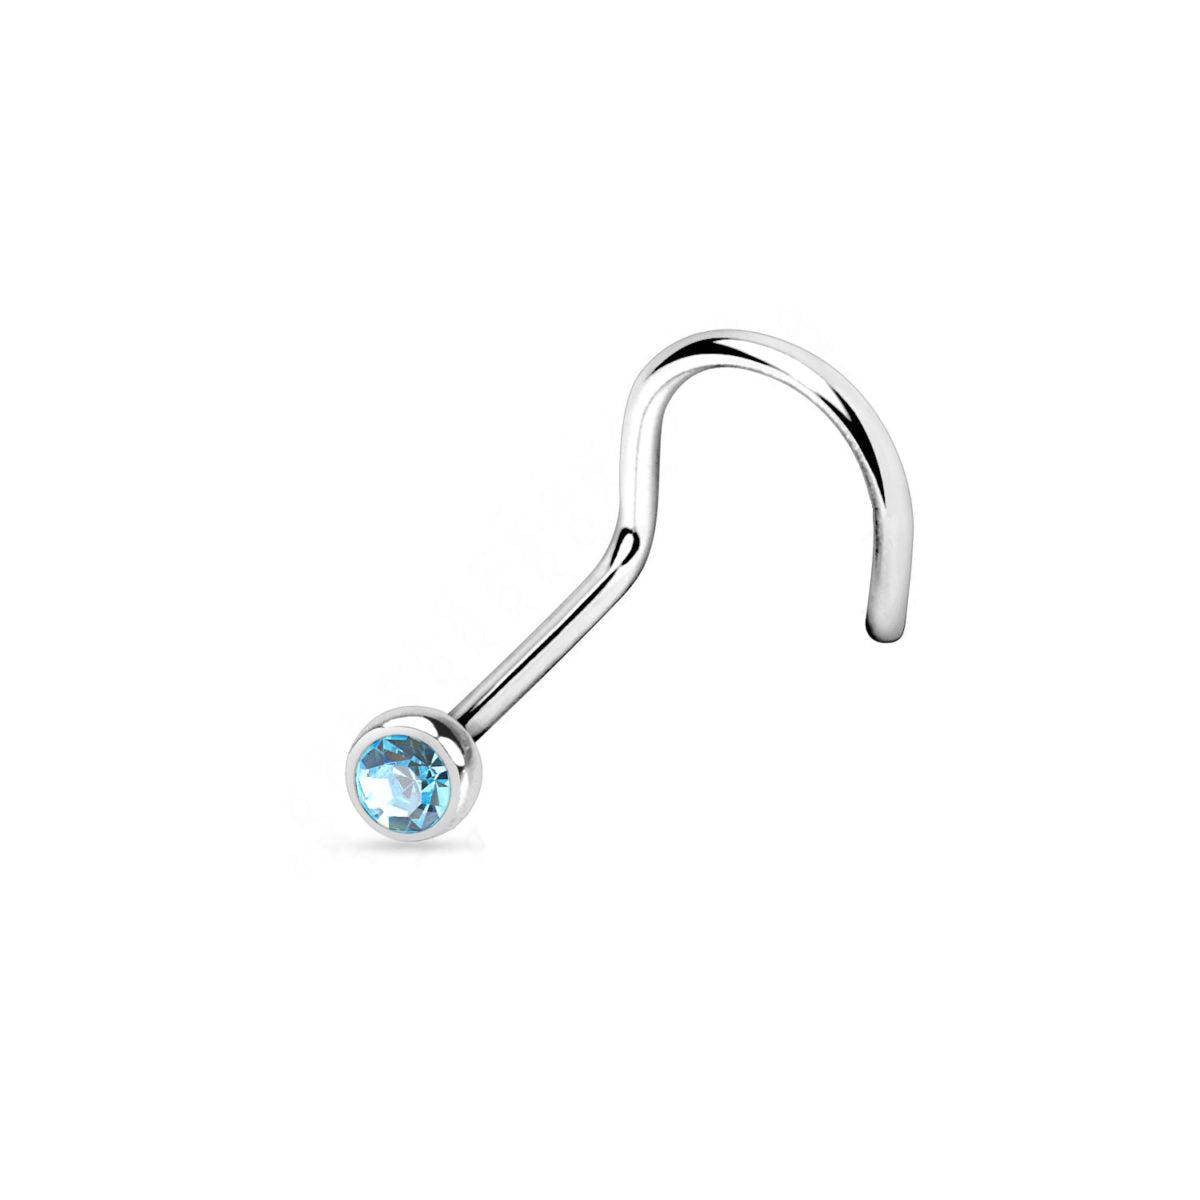 Nose Piercing Jewellery Online and Instore at SkinKandy – Page 4